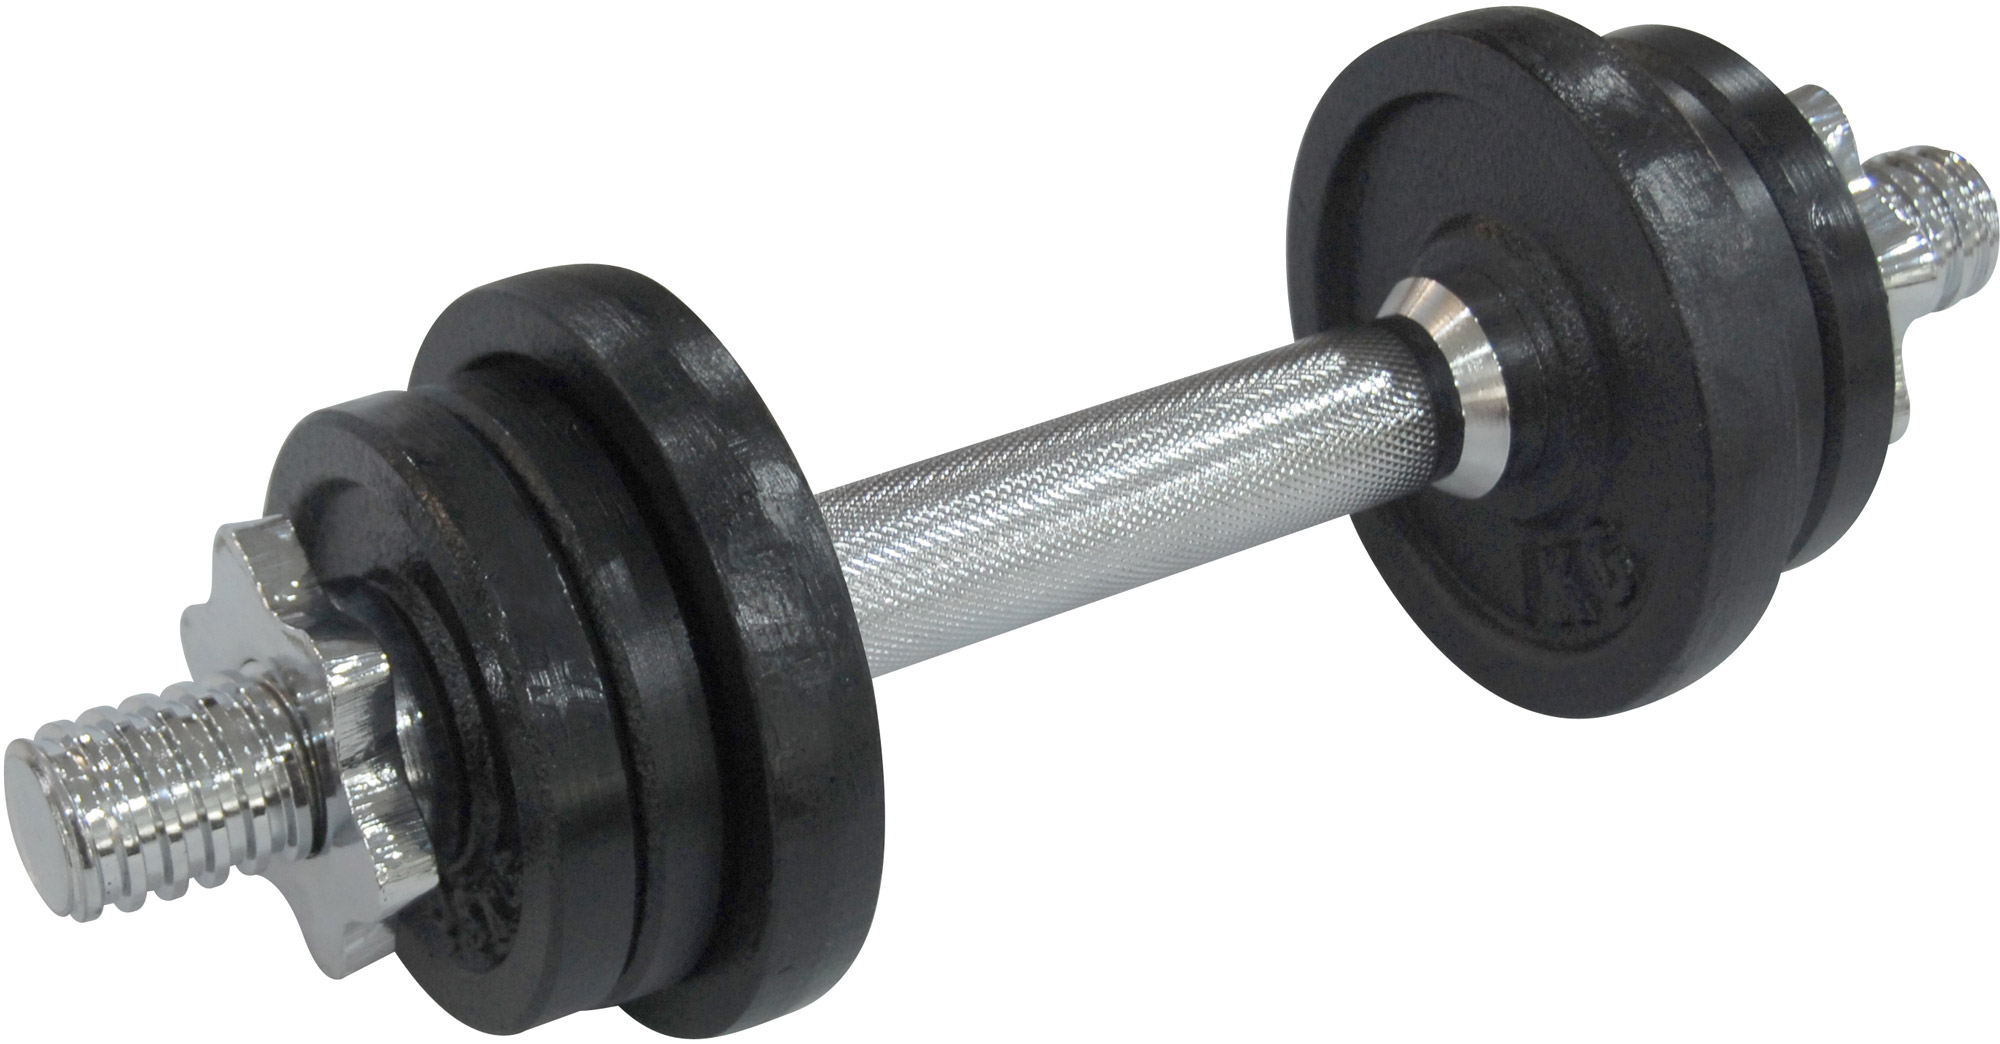 One-hand loading weight